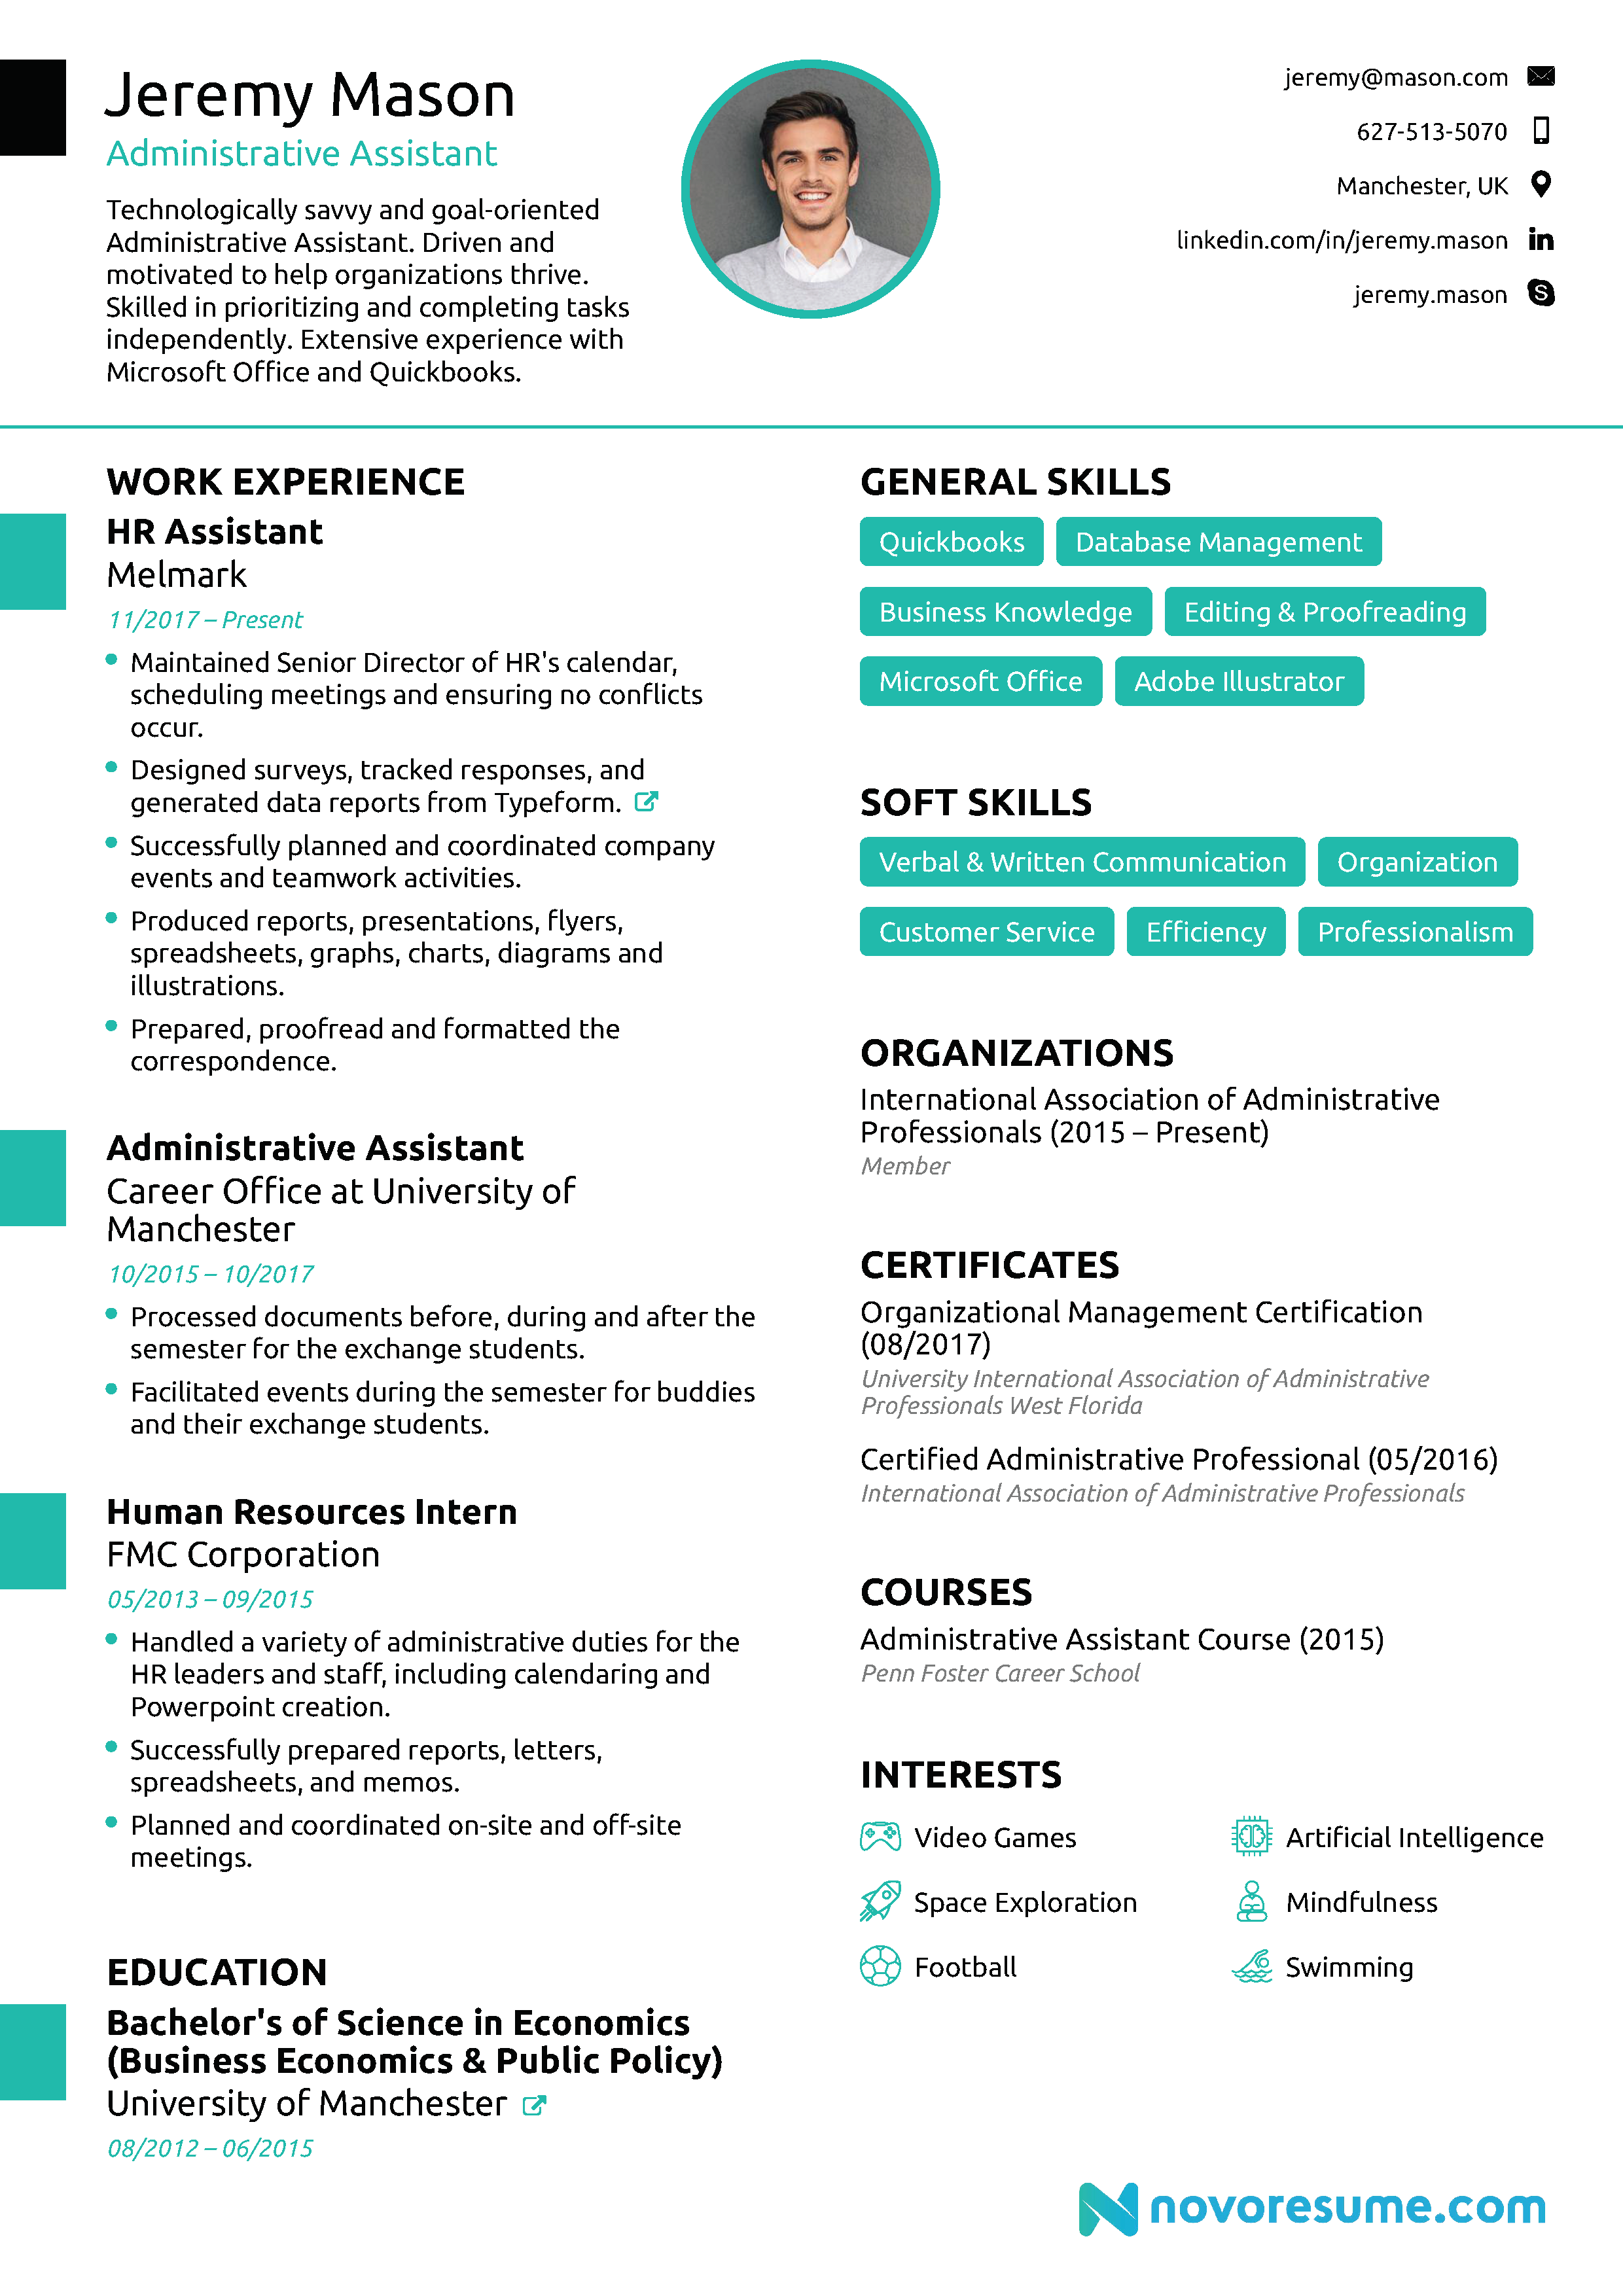 Administrative Assistant Resume [10] - Guide & Examples Throughout Executive Assistant Job Description Template In Executive Assistant Job Description Template